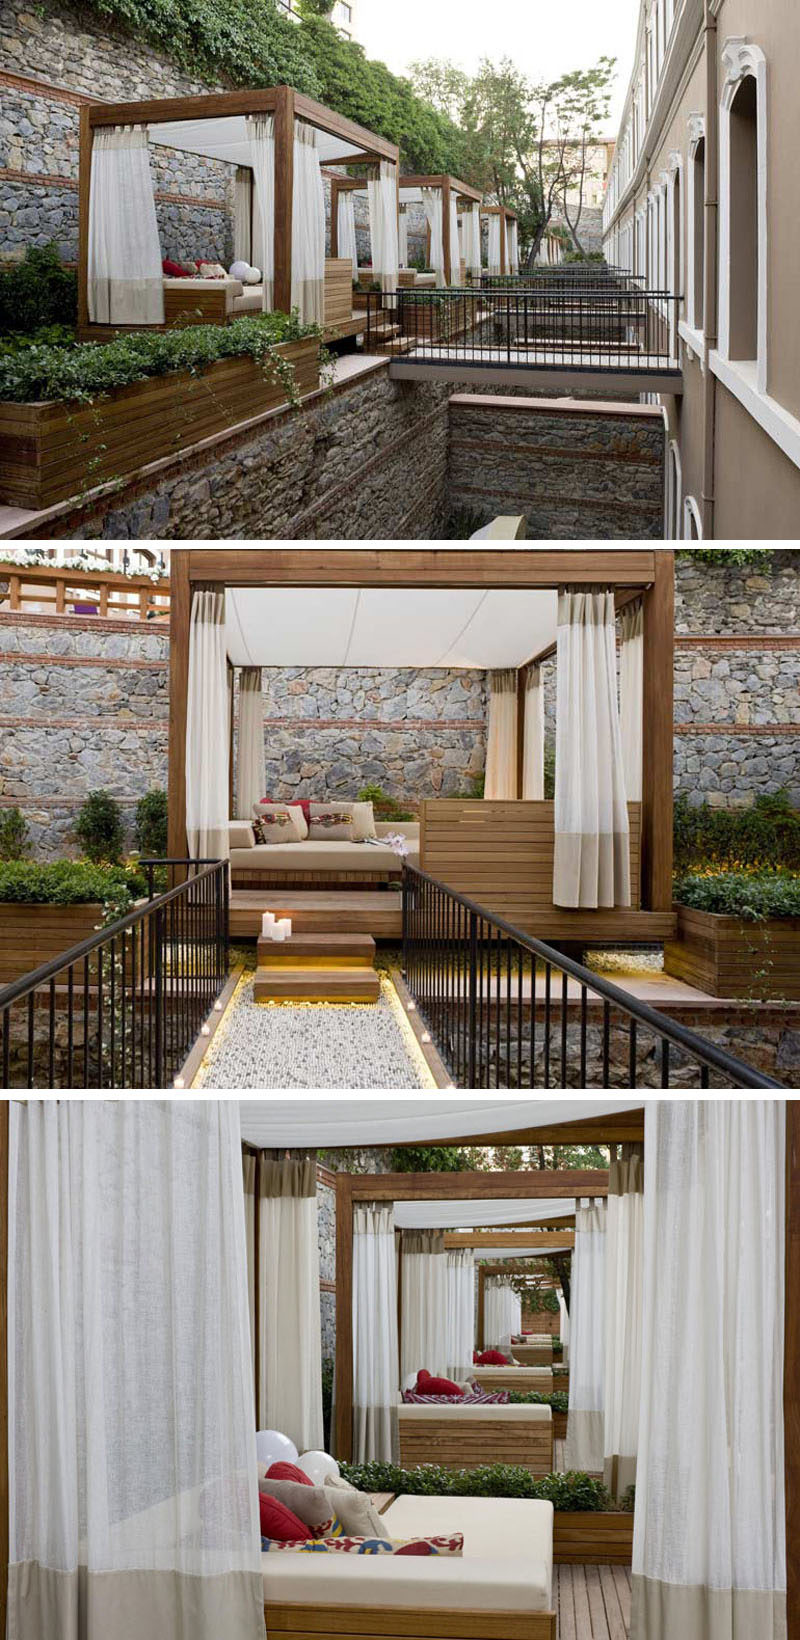 The W Hotel in Istanbul, Turkey, has private wooden cabanas attached to some of their rooms.